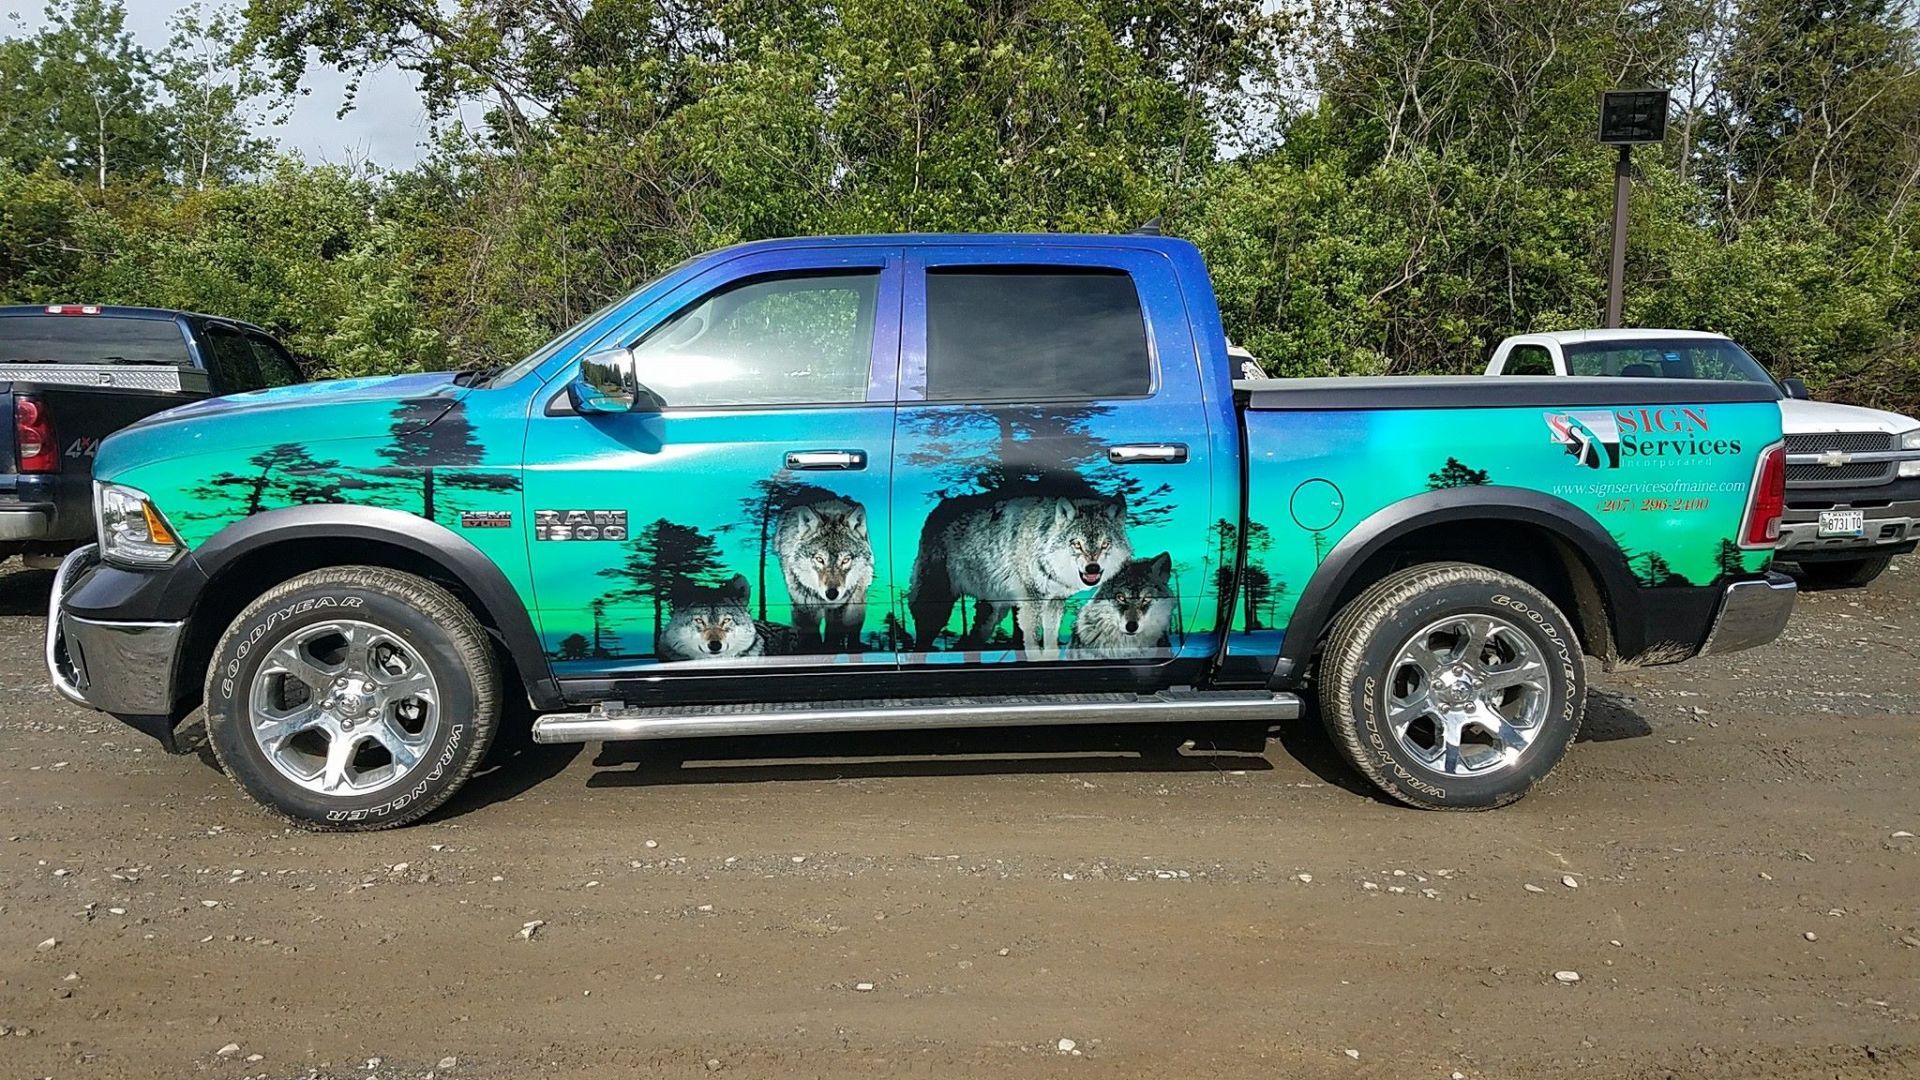 Car with summer wraps — Car Wraps in Stetson, ME